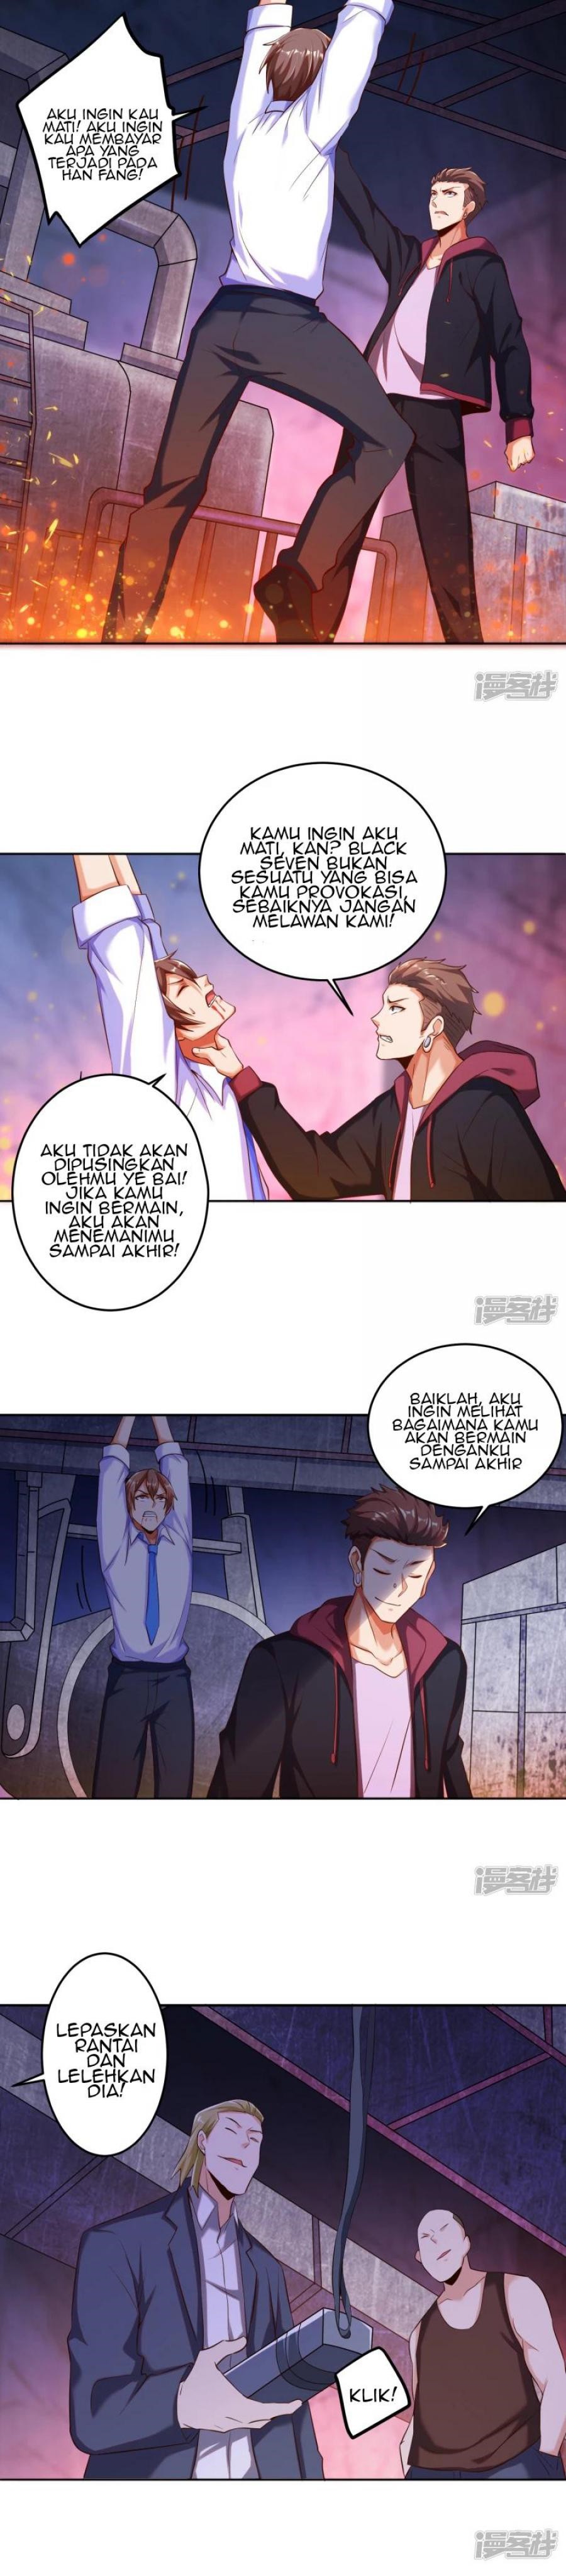 Become A God Chapter 17 Bahasa indonesia